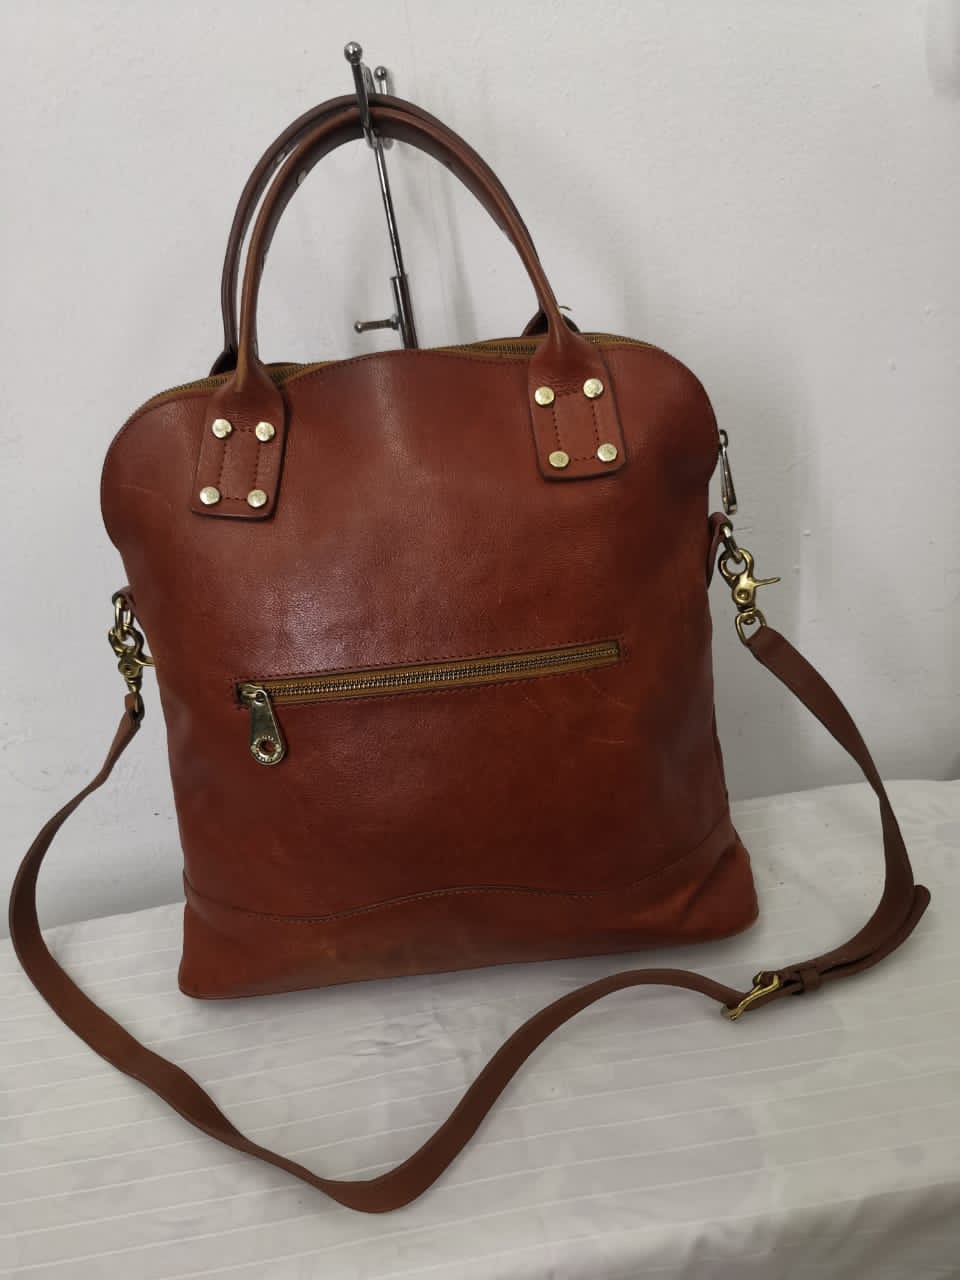 Vintage Mulberry Leather Handle Bag - 1